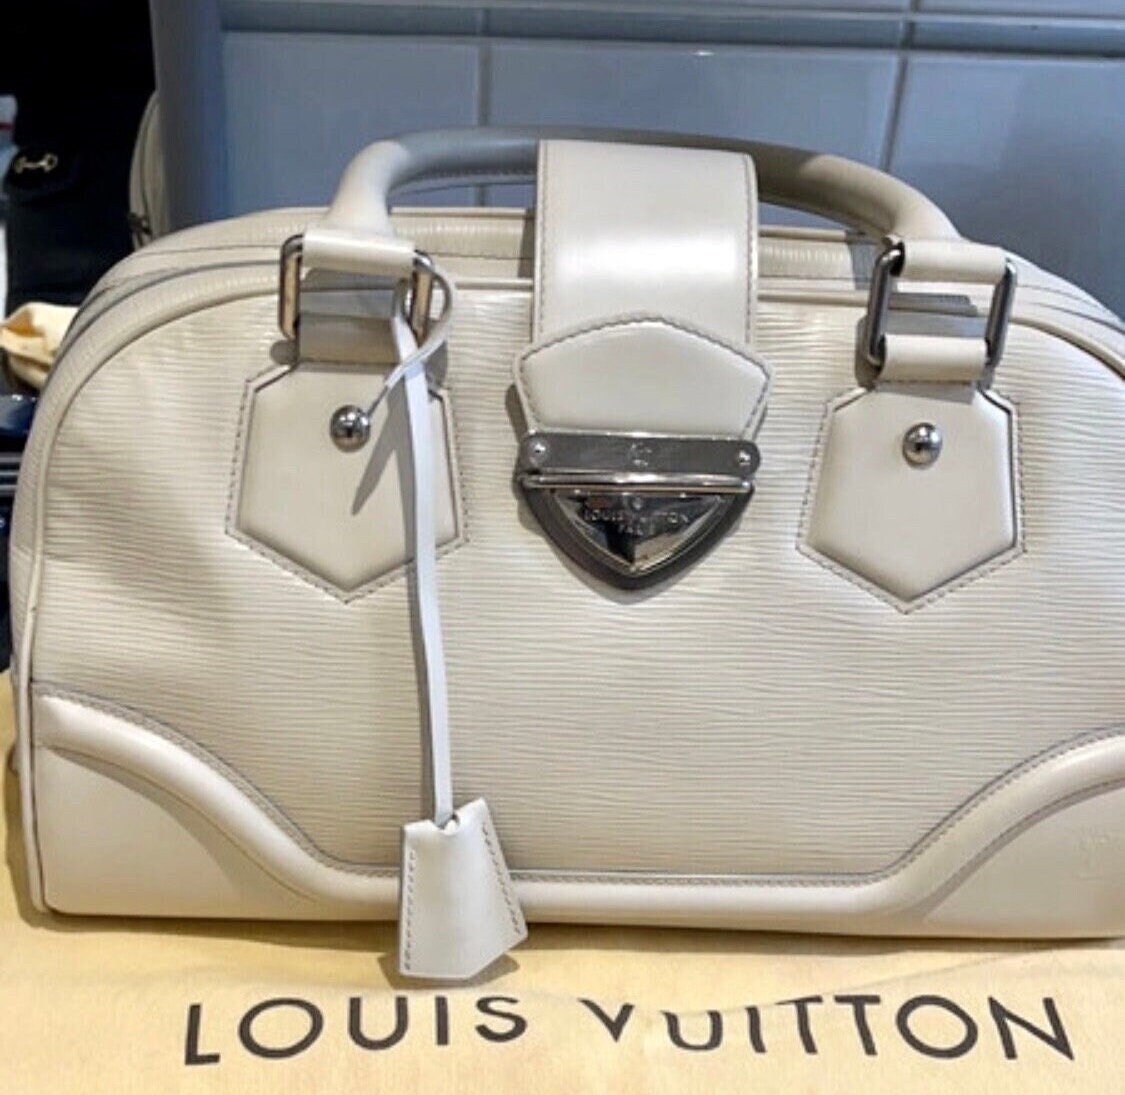 LV Bowling Montaigne GM Ivory/White EPI Leather With Silver